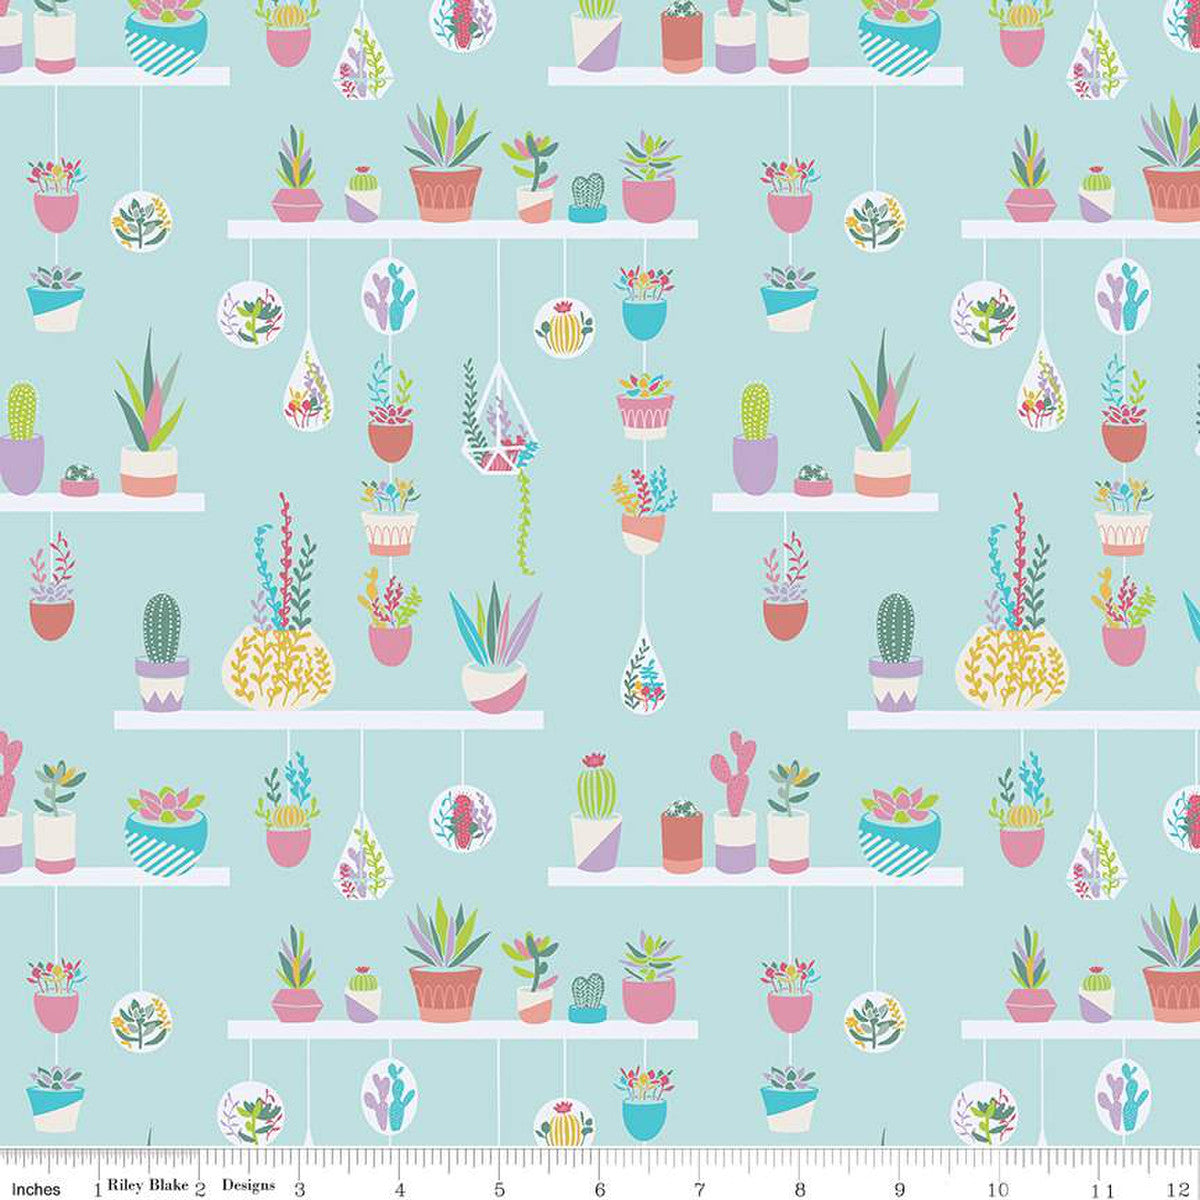 Succulents and cactus on blue cotton fabric - Arid Oasis - Riley Blake